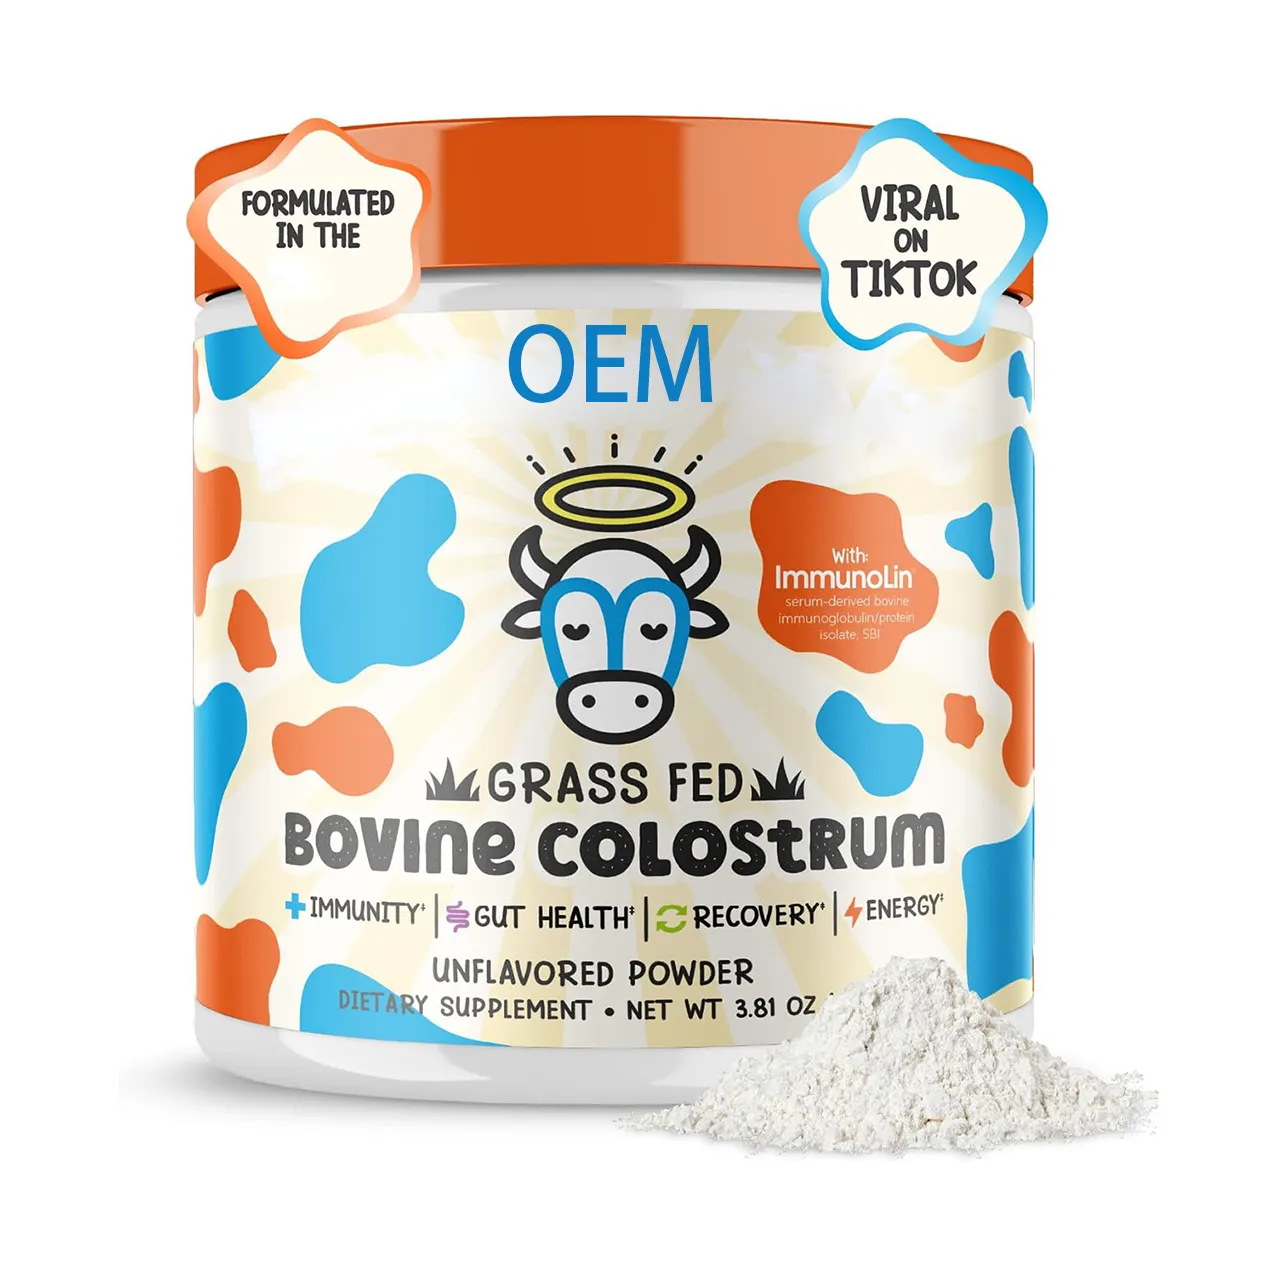 Highly Concentrated Pure Bovine Colostrum Supplement Colostrum Powder for Gut Health Hair Growth Beauty and Immune Support